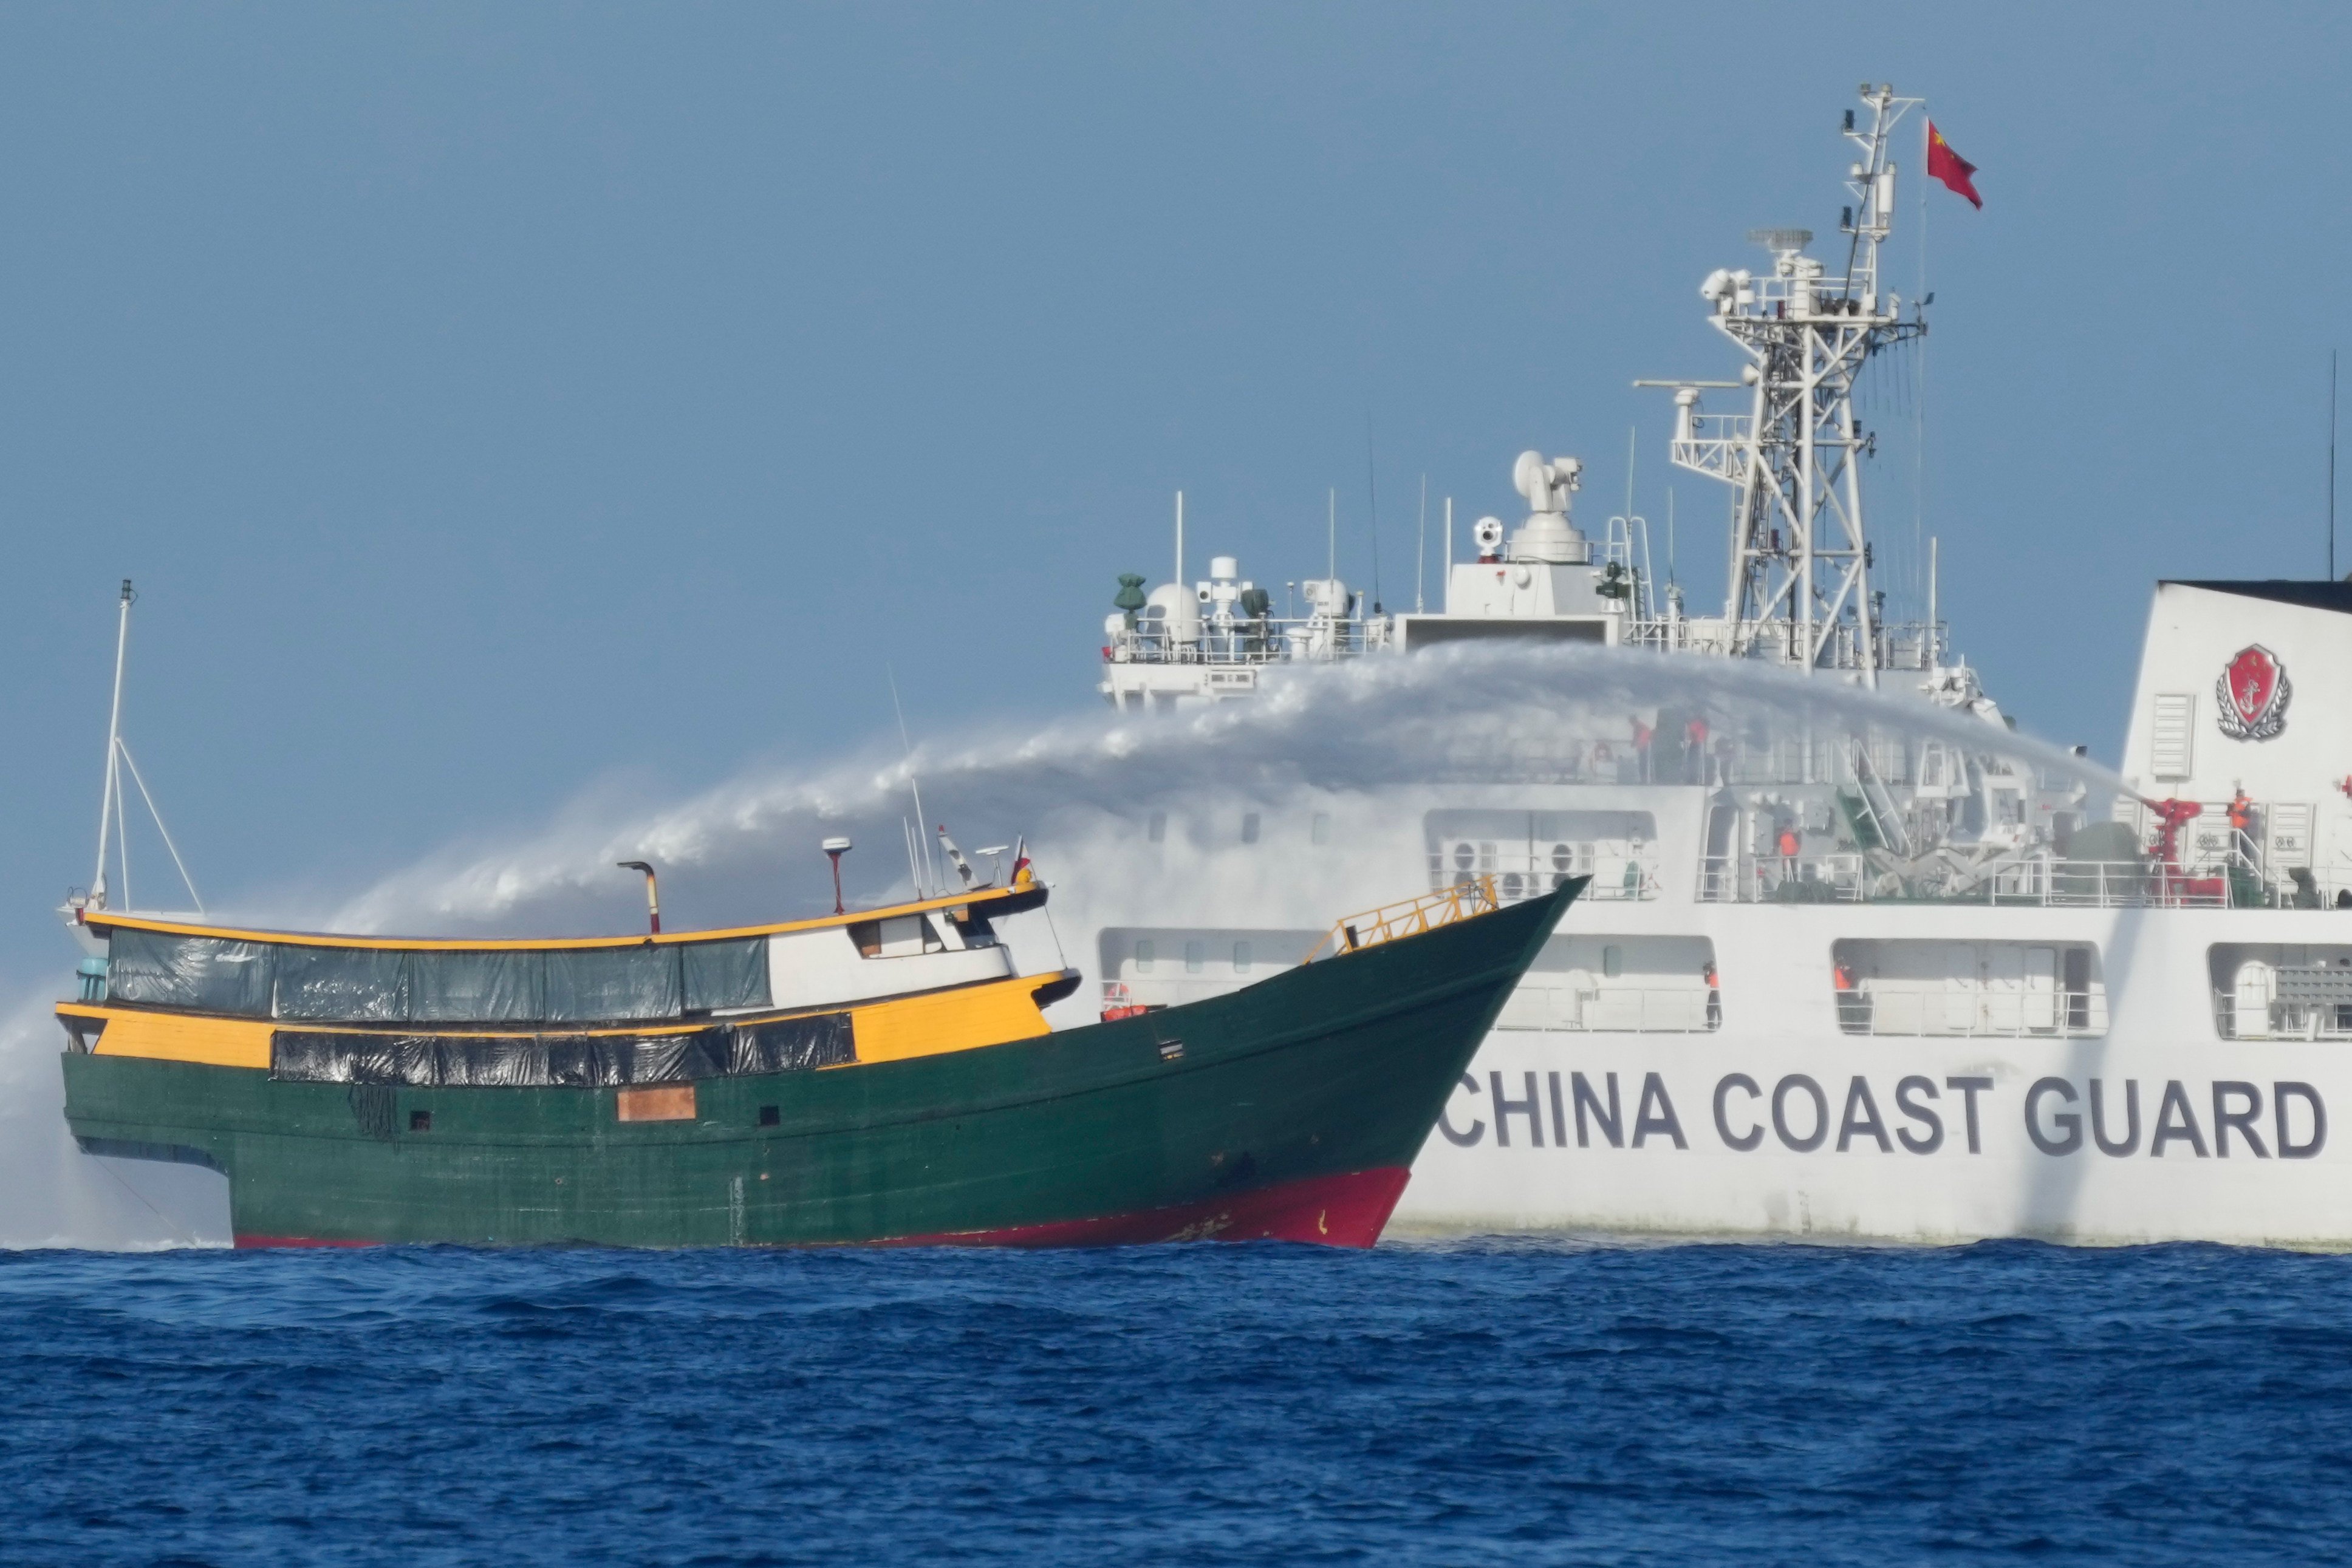 An ongoing maritime dispute between China and the Philippines threatens bilateral ties. Photo: AP